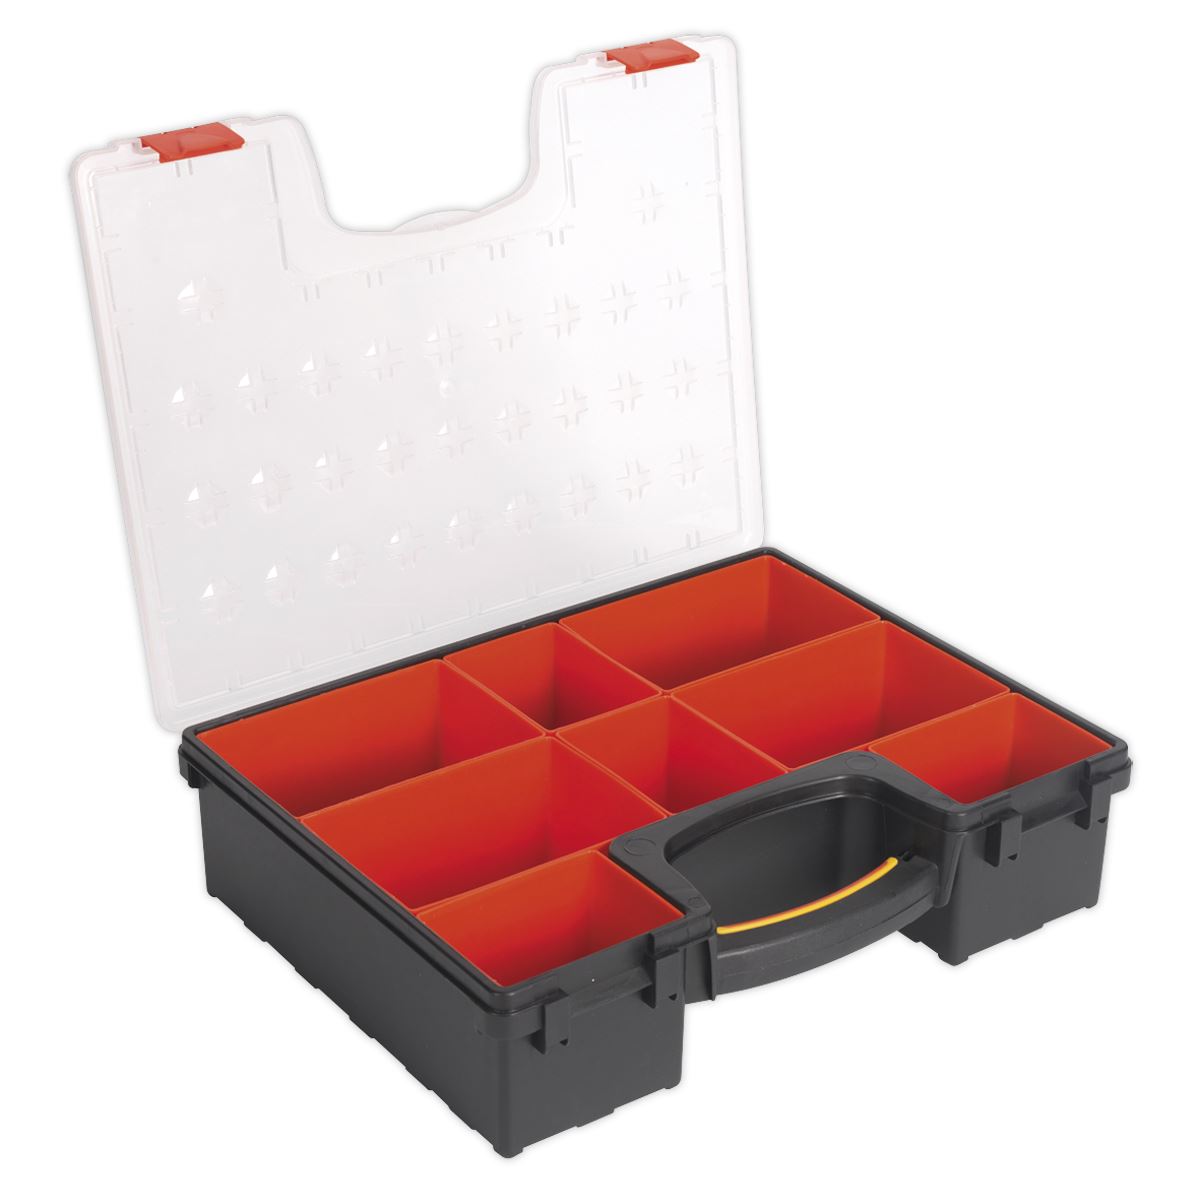 Sealey Parts Storage Case Organiser with 8 Removable Compartments Tool Screw Box